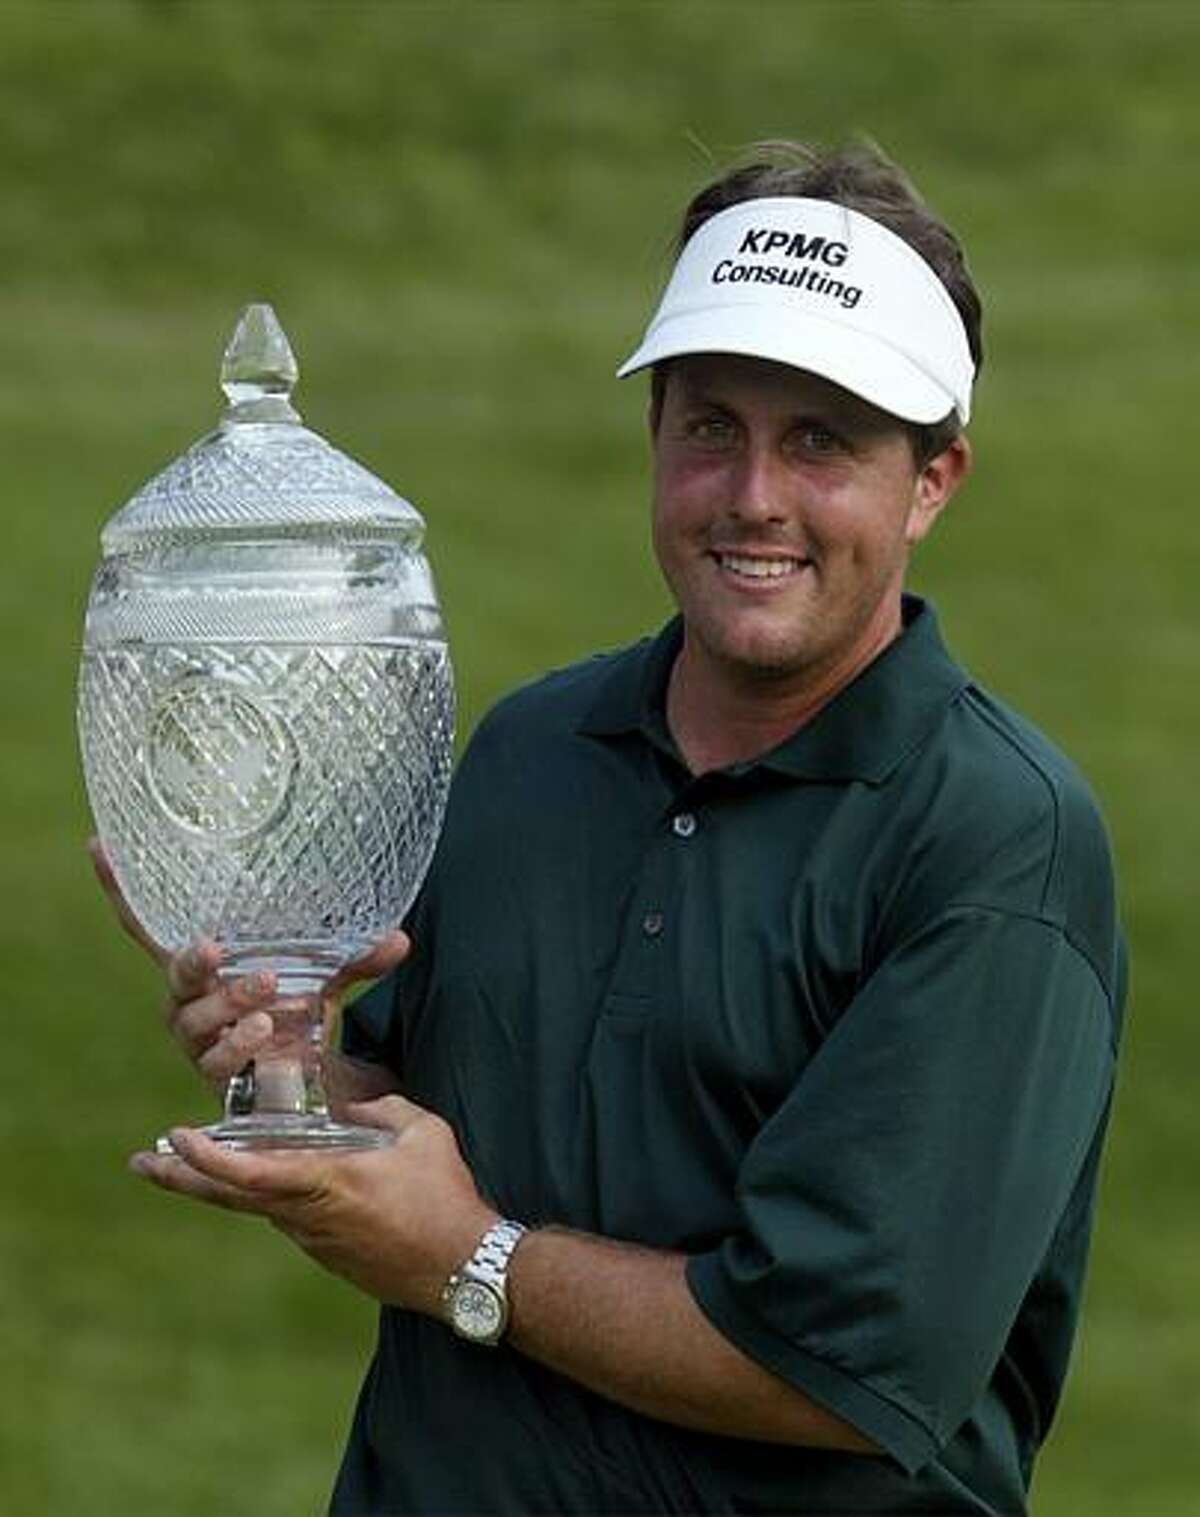 Phil Mickelson hasn't been to Cromwell since 2003 but he hasn't ruled out a return, thanks to the persistence of tournament director Nathan Grube and the organizers of the Travelers Championship. (AP)